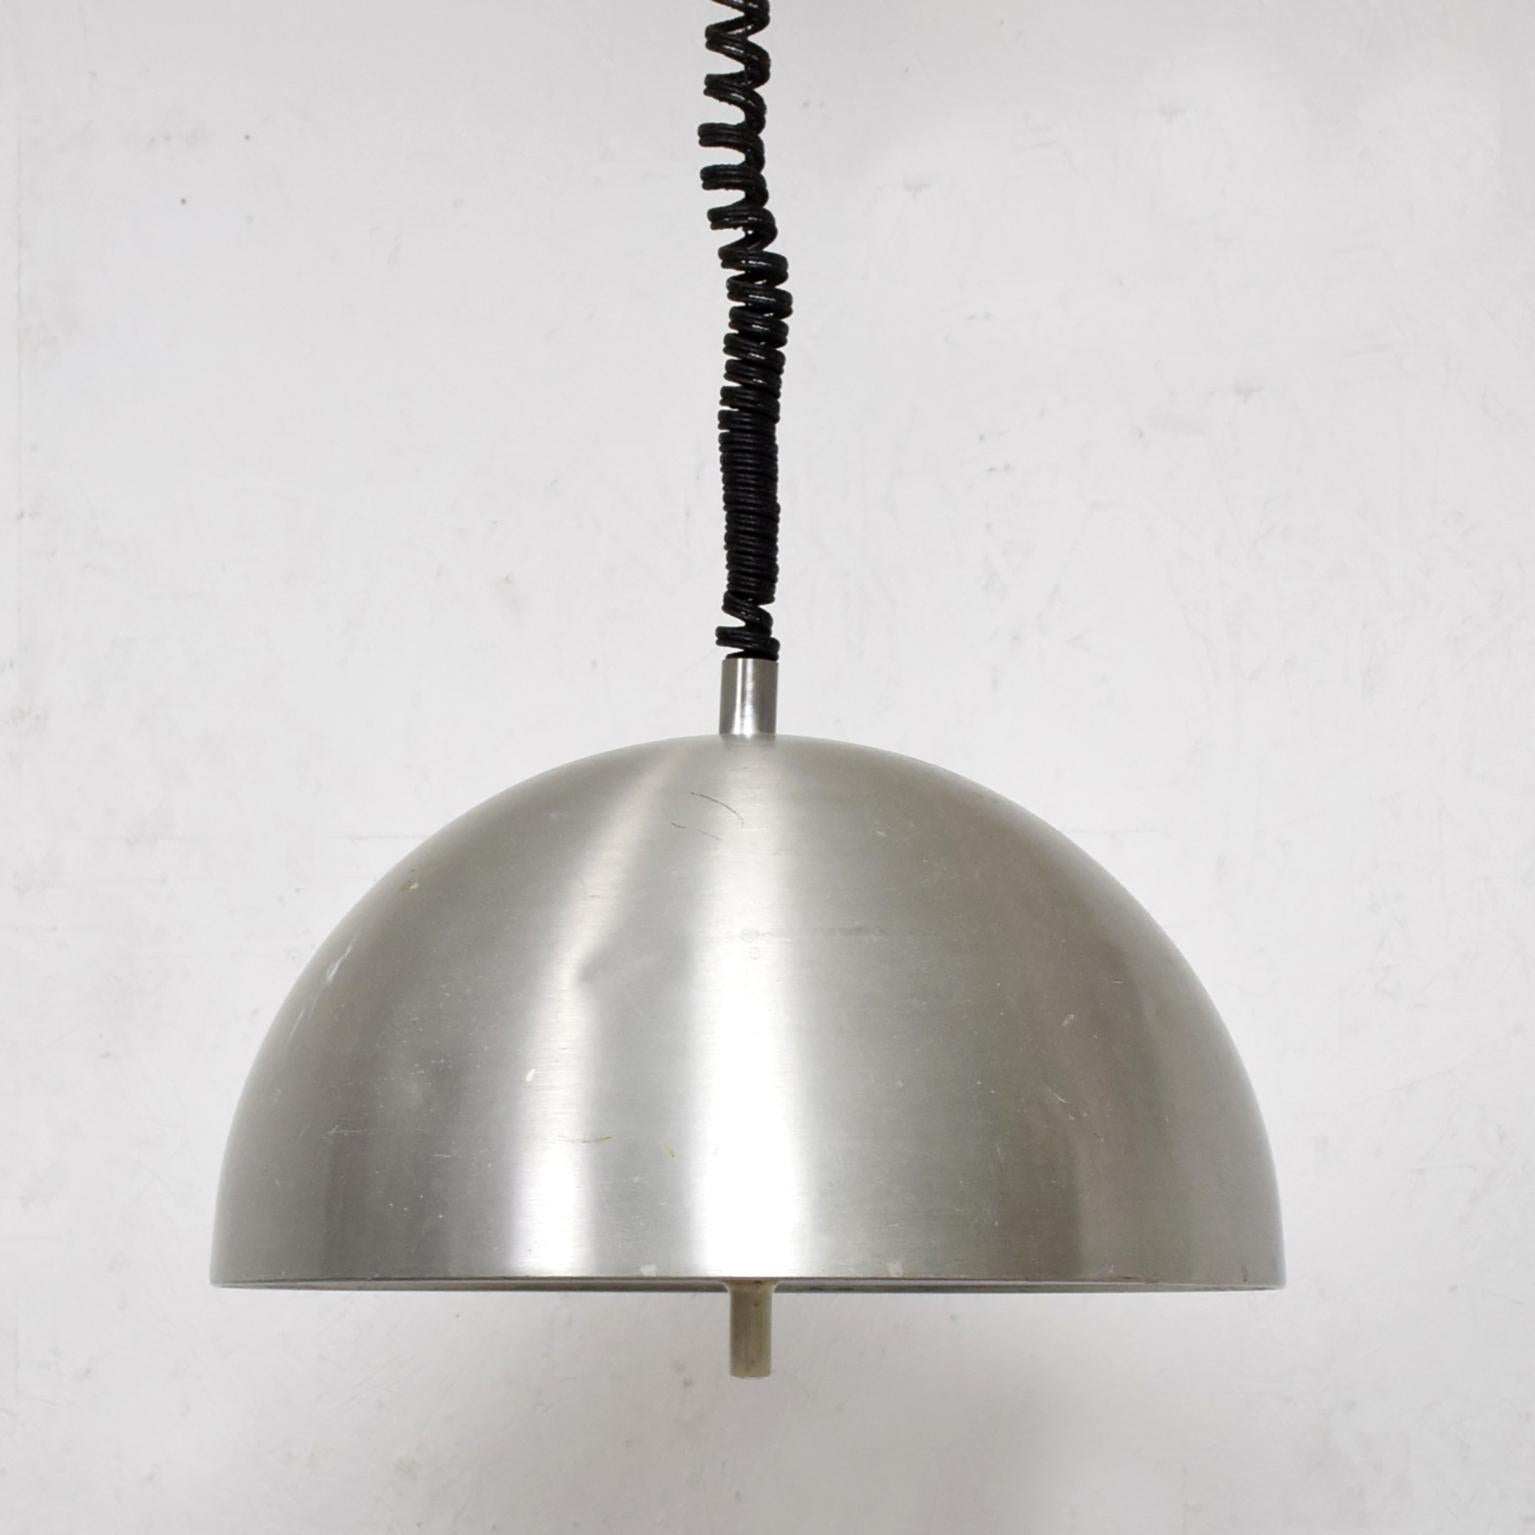 Pendant Ceiling Lamp
Italian Pendant Ceiling Lamp Light Milan Italy circa 1960s attributed to Stilnovo
Diffused silver dome made in aluminum and plexiglass lamp is adjustable black mount. 
Unmarked.
29 H x 15.5 W x 8 D   
Original Unrestored vintage